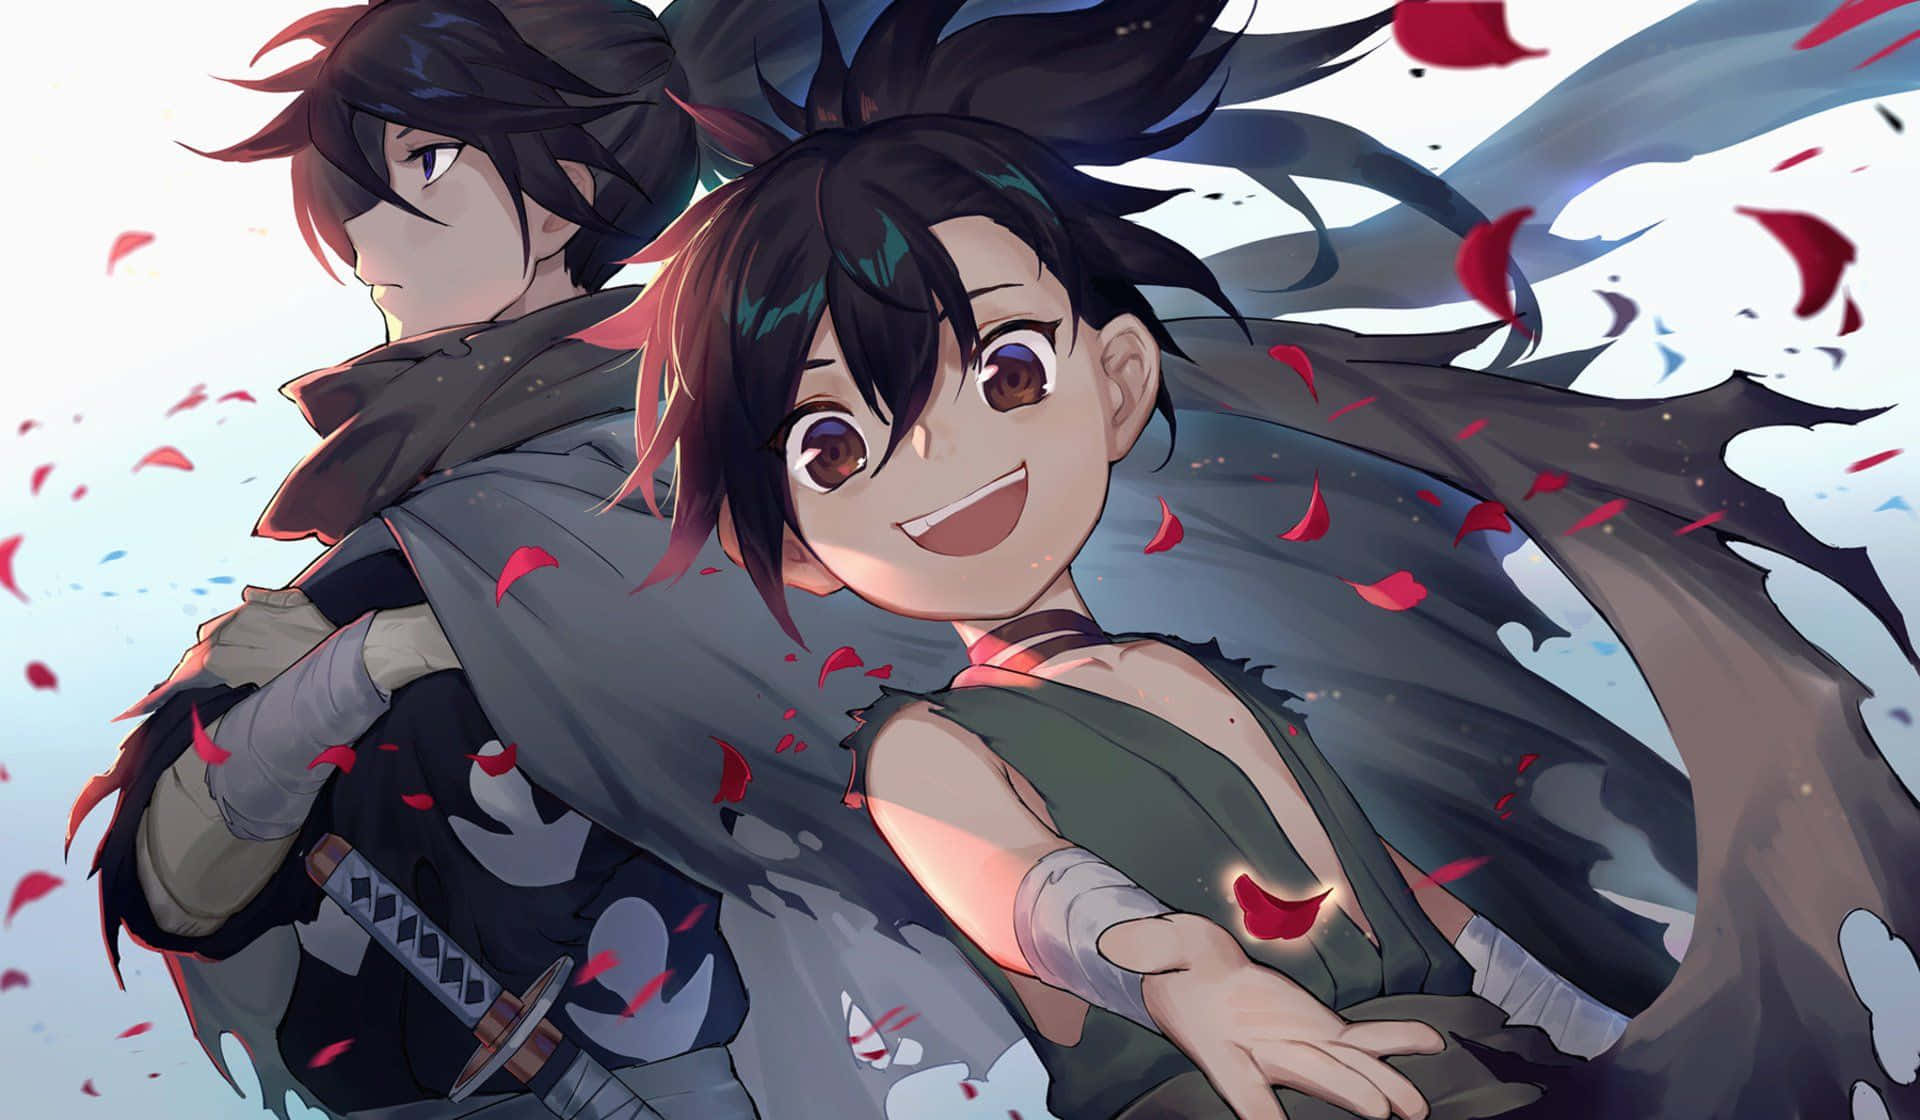 Hyakkimaru joins forces with Dororo in the ongoing battle of good versus evil.